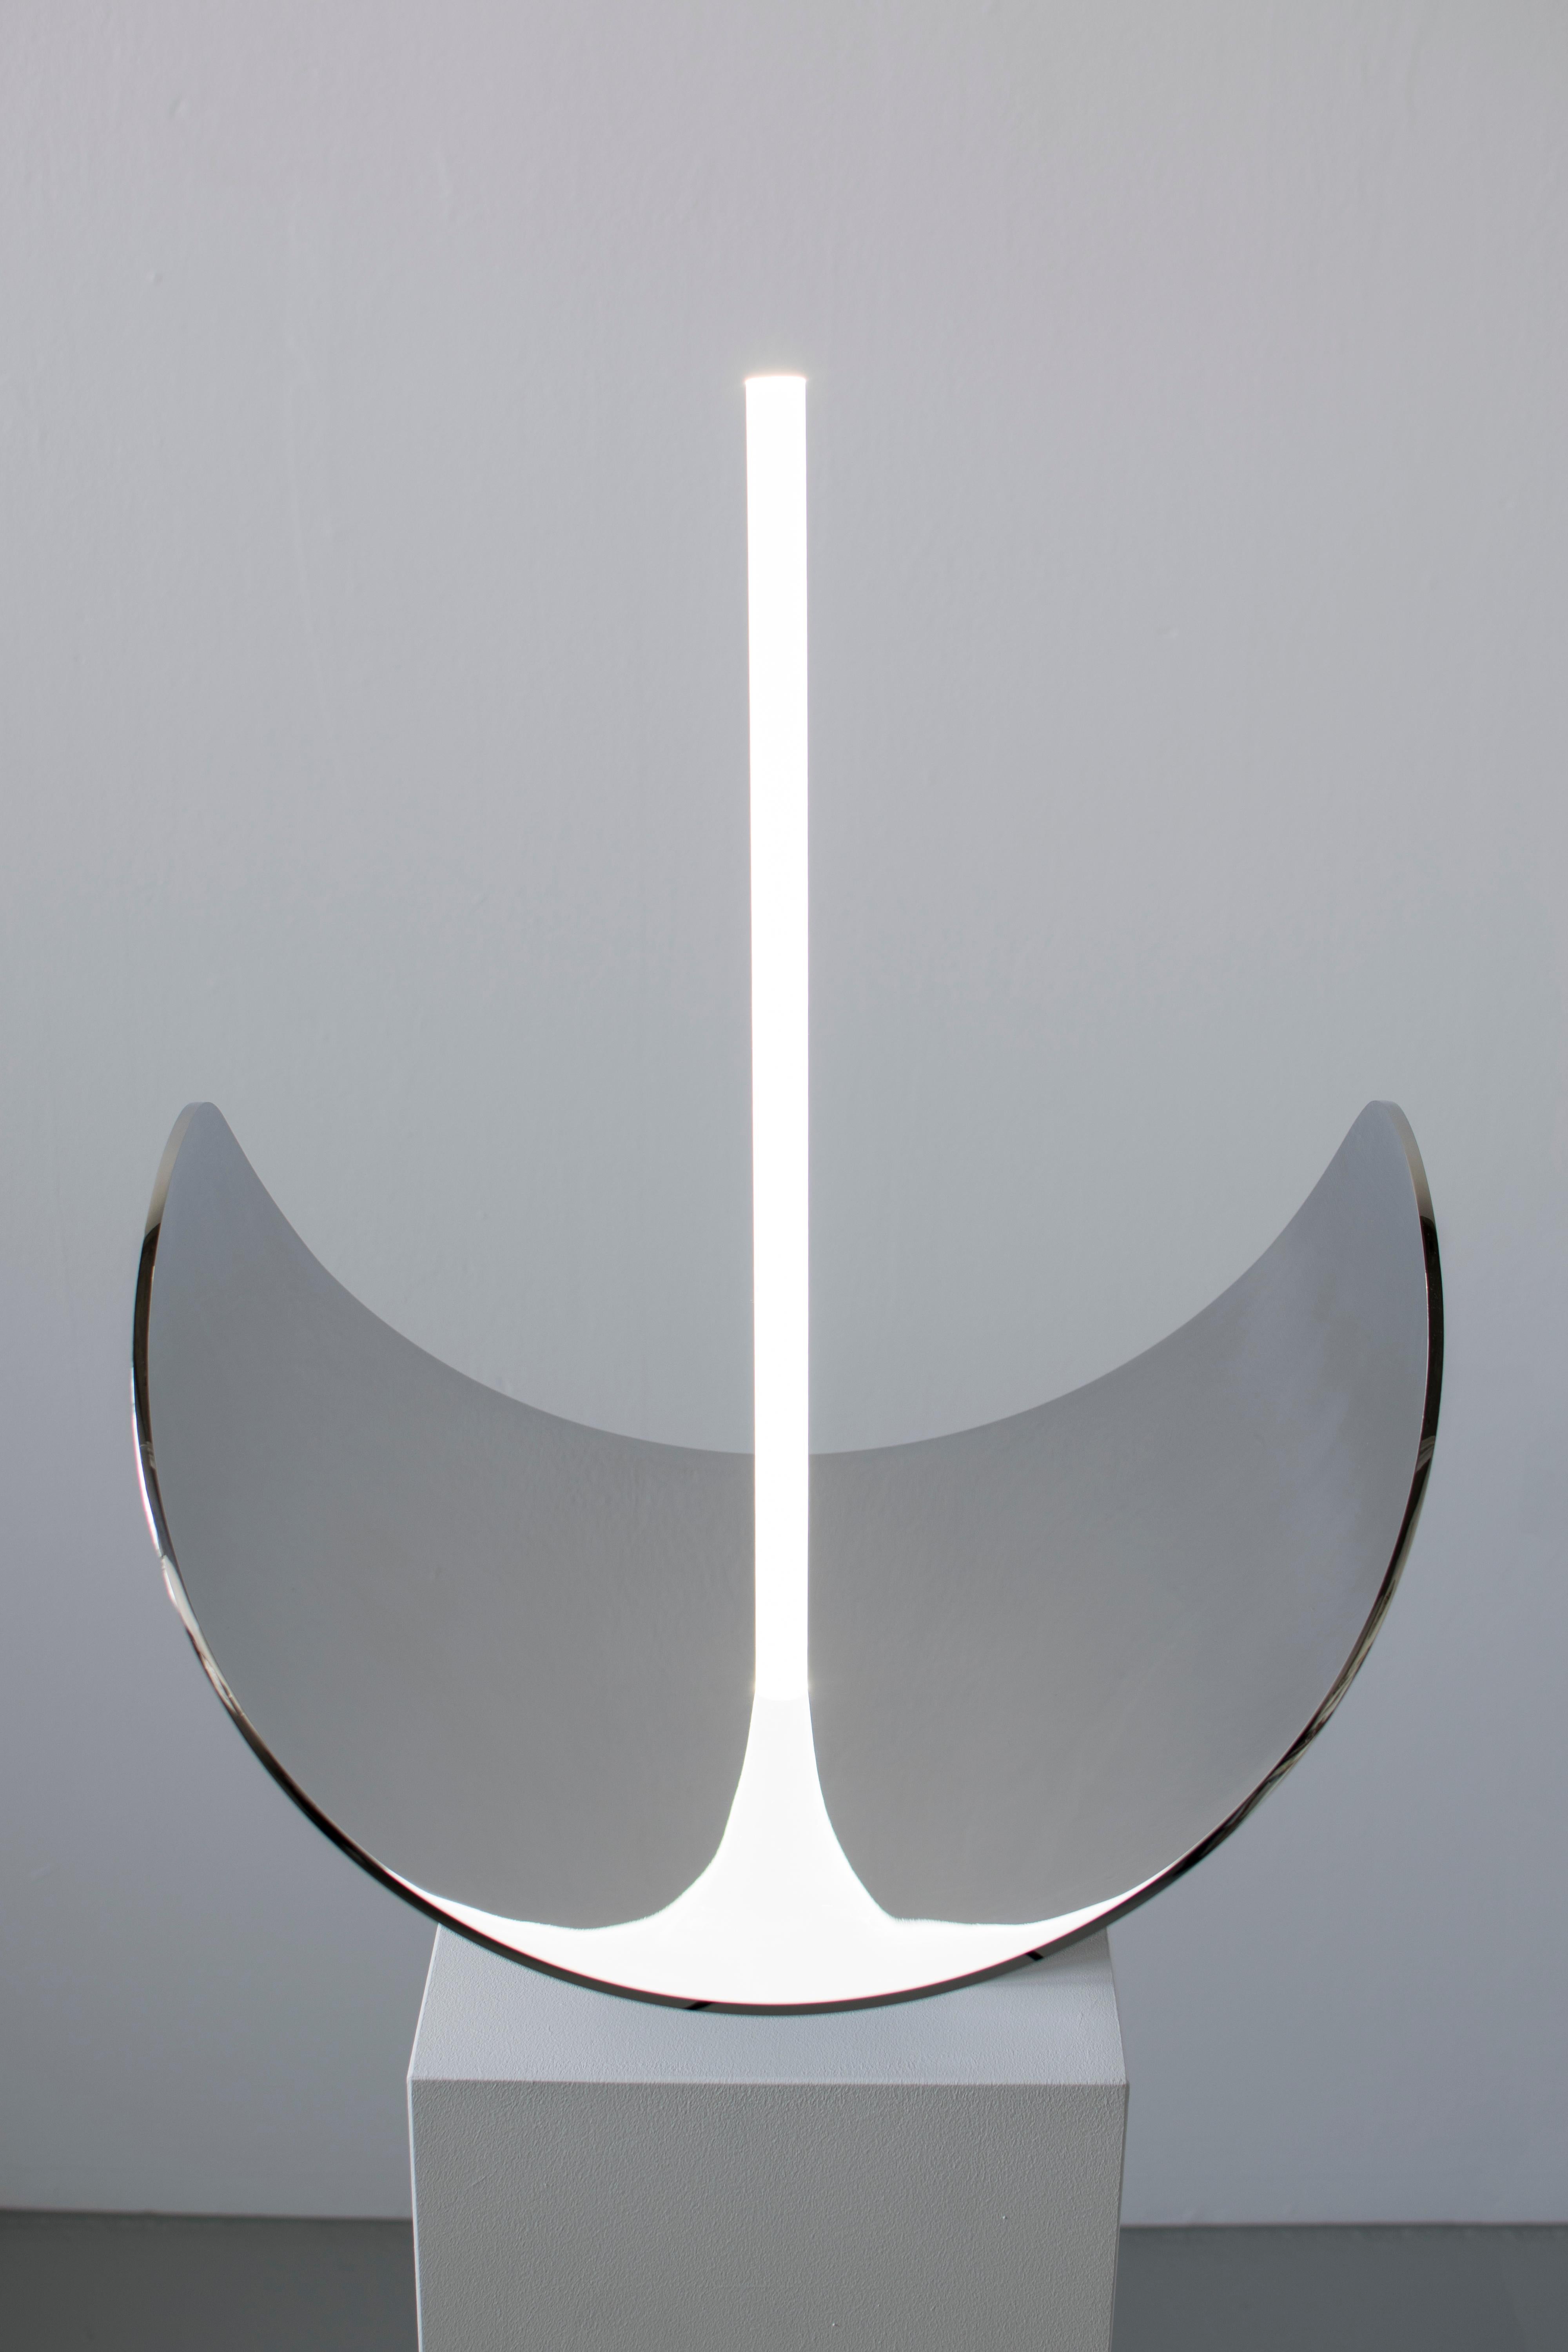 Elusive 09
A beautiful piece exploring the line between visible and invisible: half mirror, half floor lamp, half sculpture.
By Maximilian Michaelis.

Blue stone, polished stainless steel, acrylic glass, Led
Measure: 60 x 50 x 50 cm.